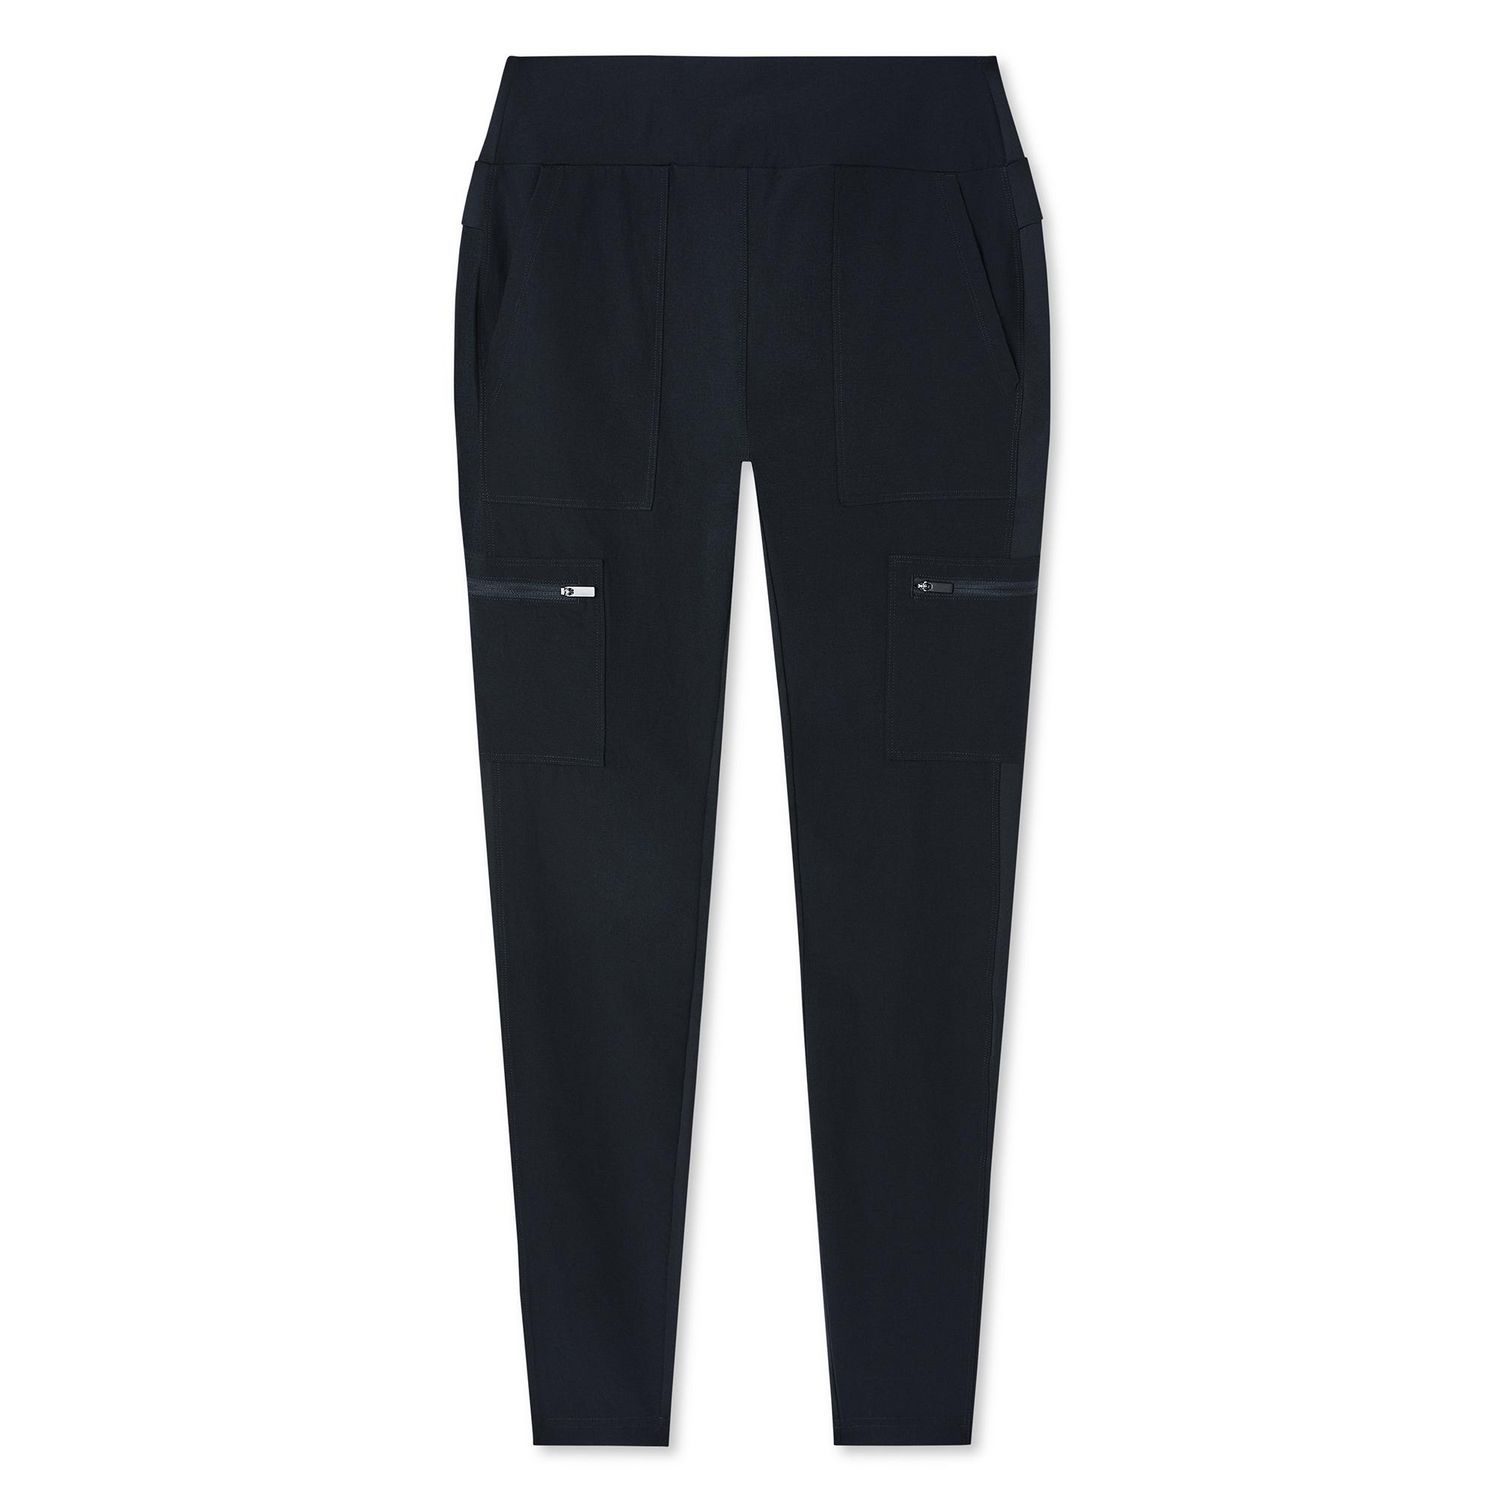 Athletic Works Green Active Pants Size XL - 21% off